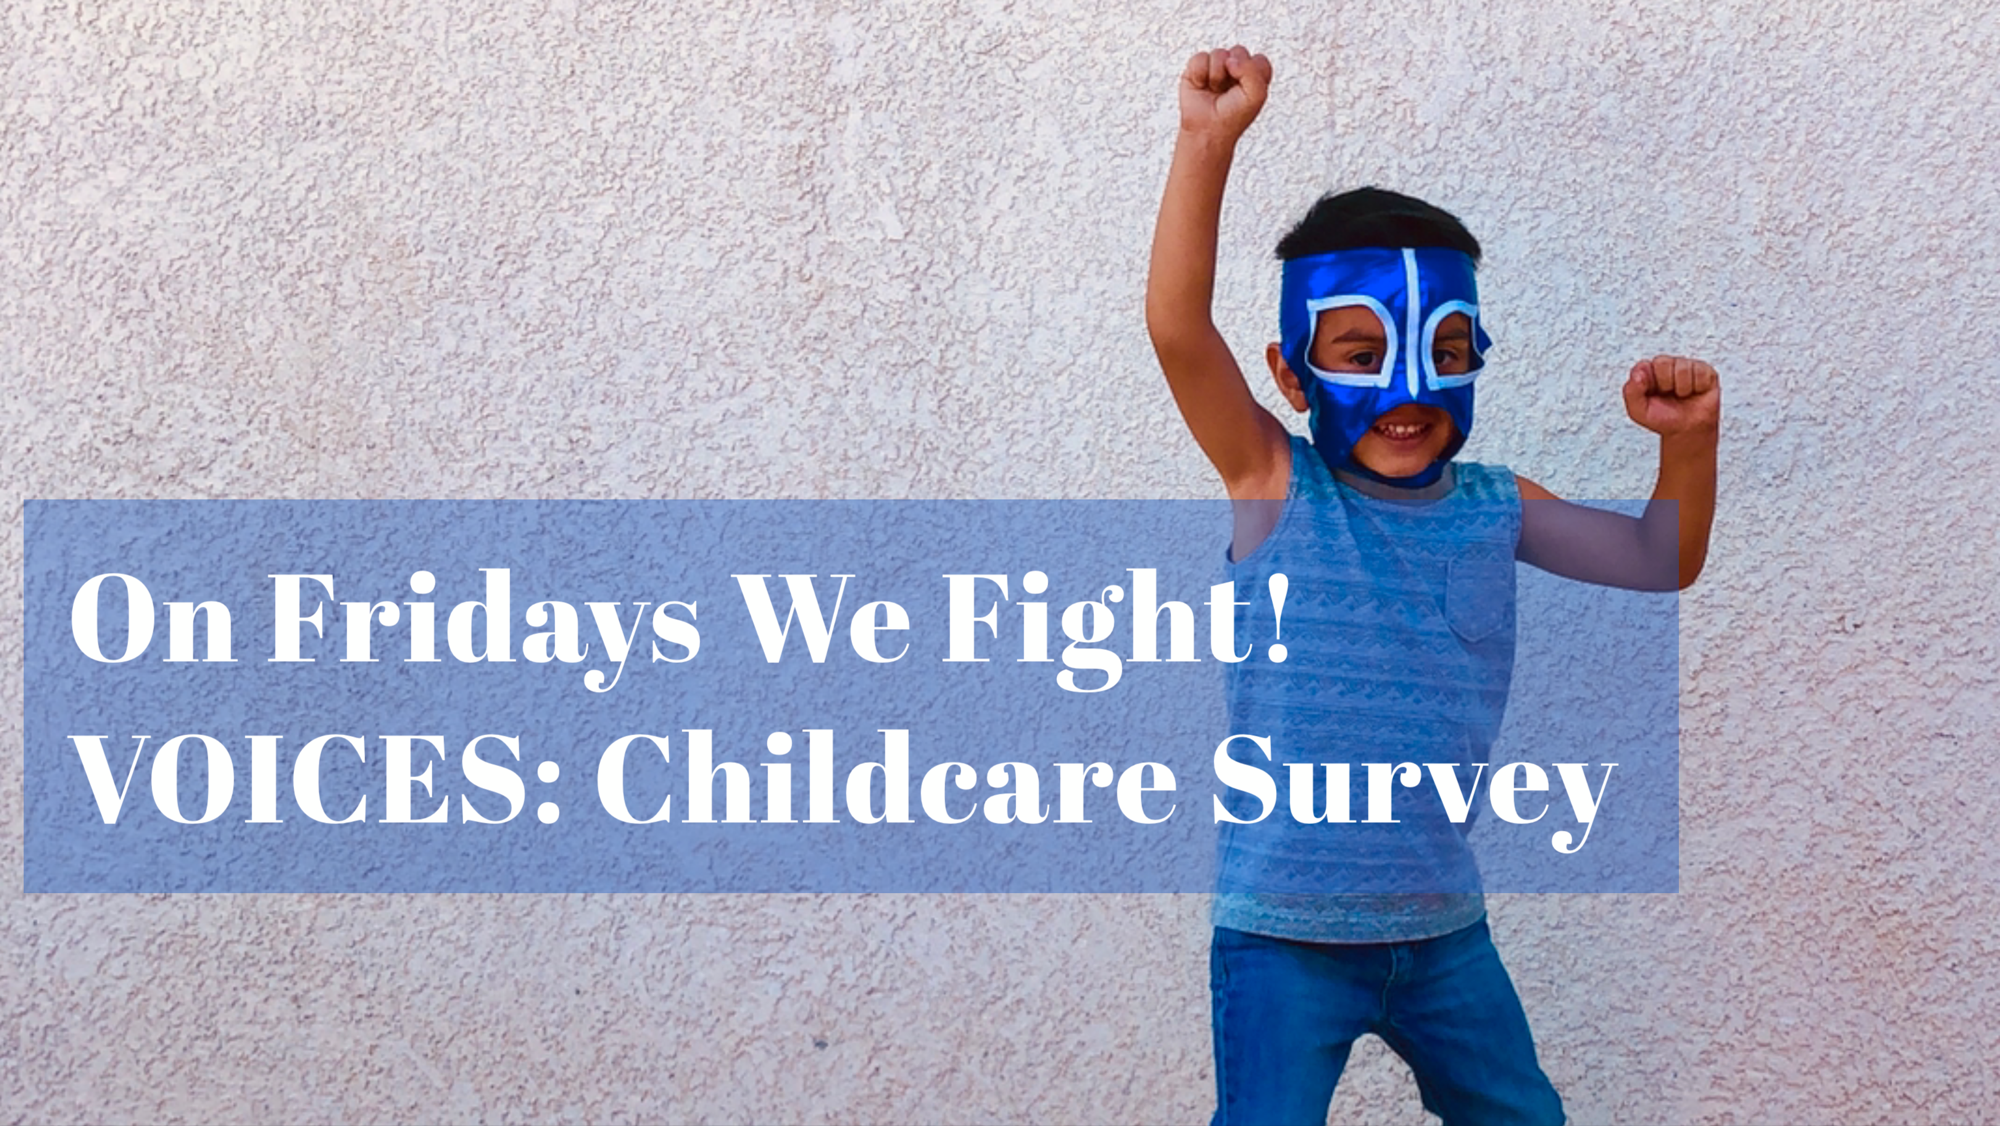 On Fridays We Fight! VOICES: Childcare Survey